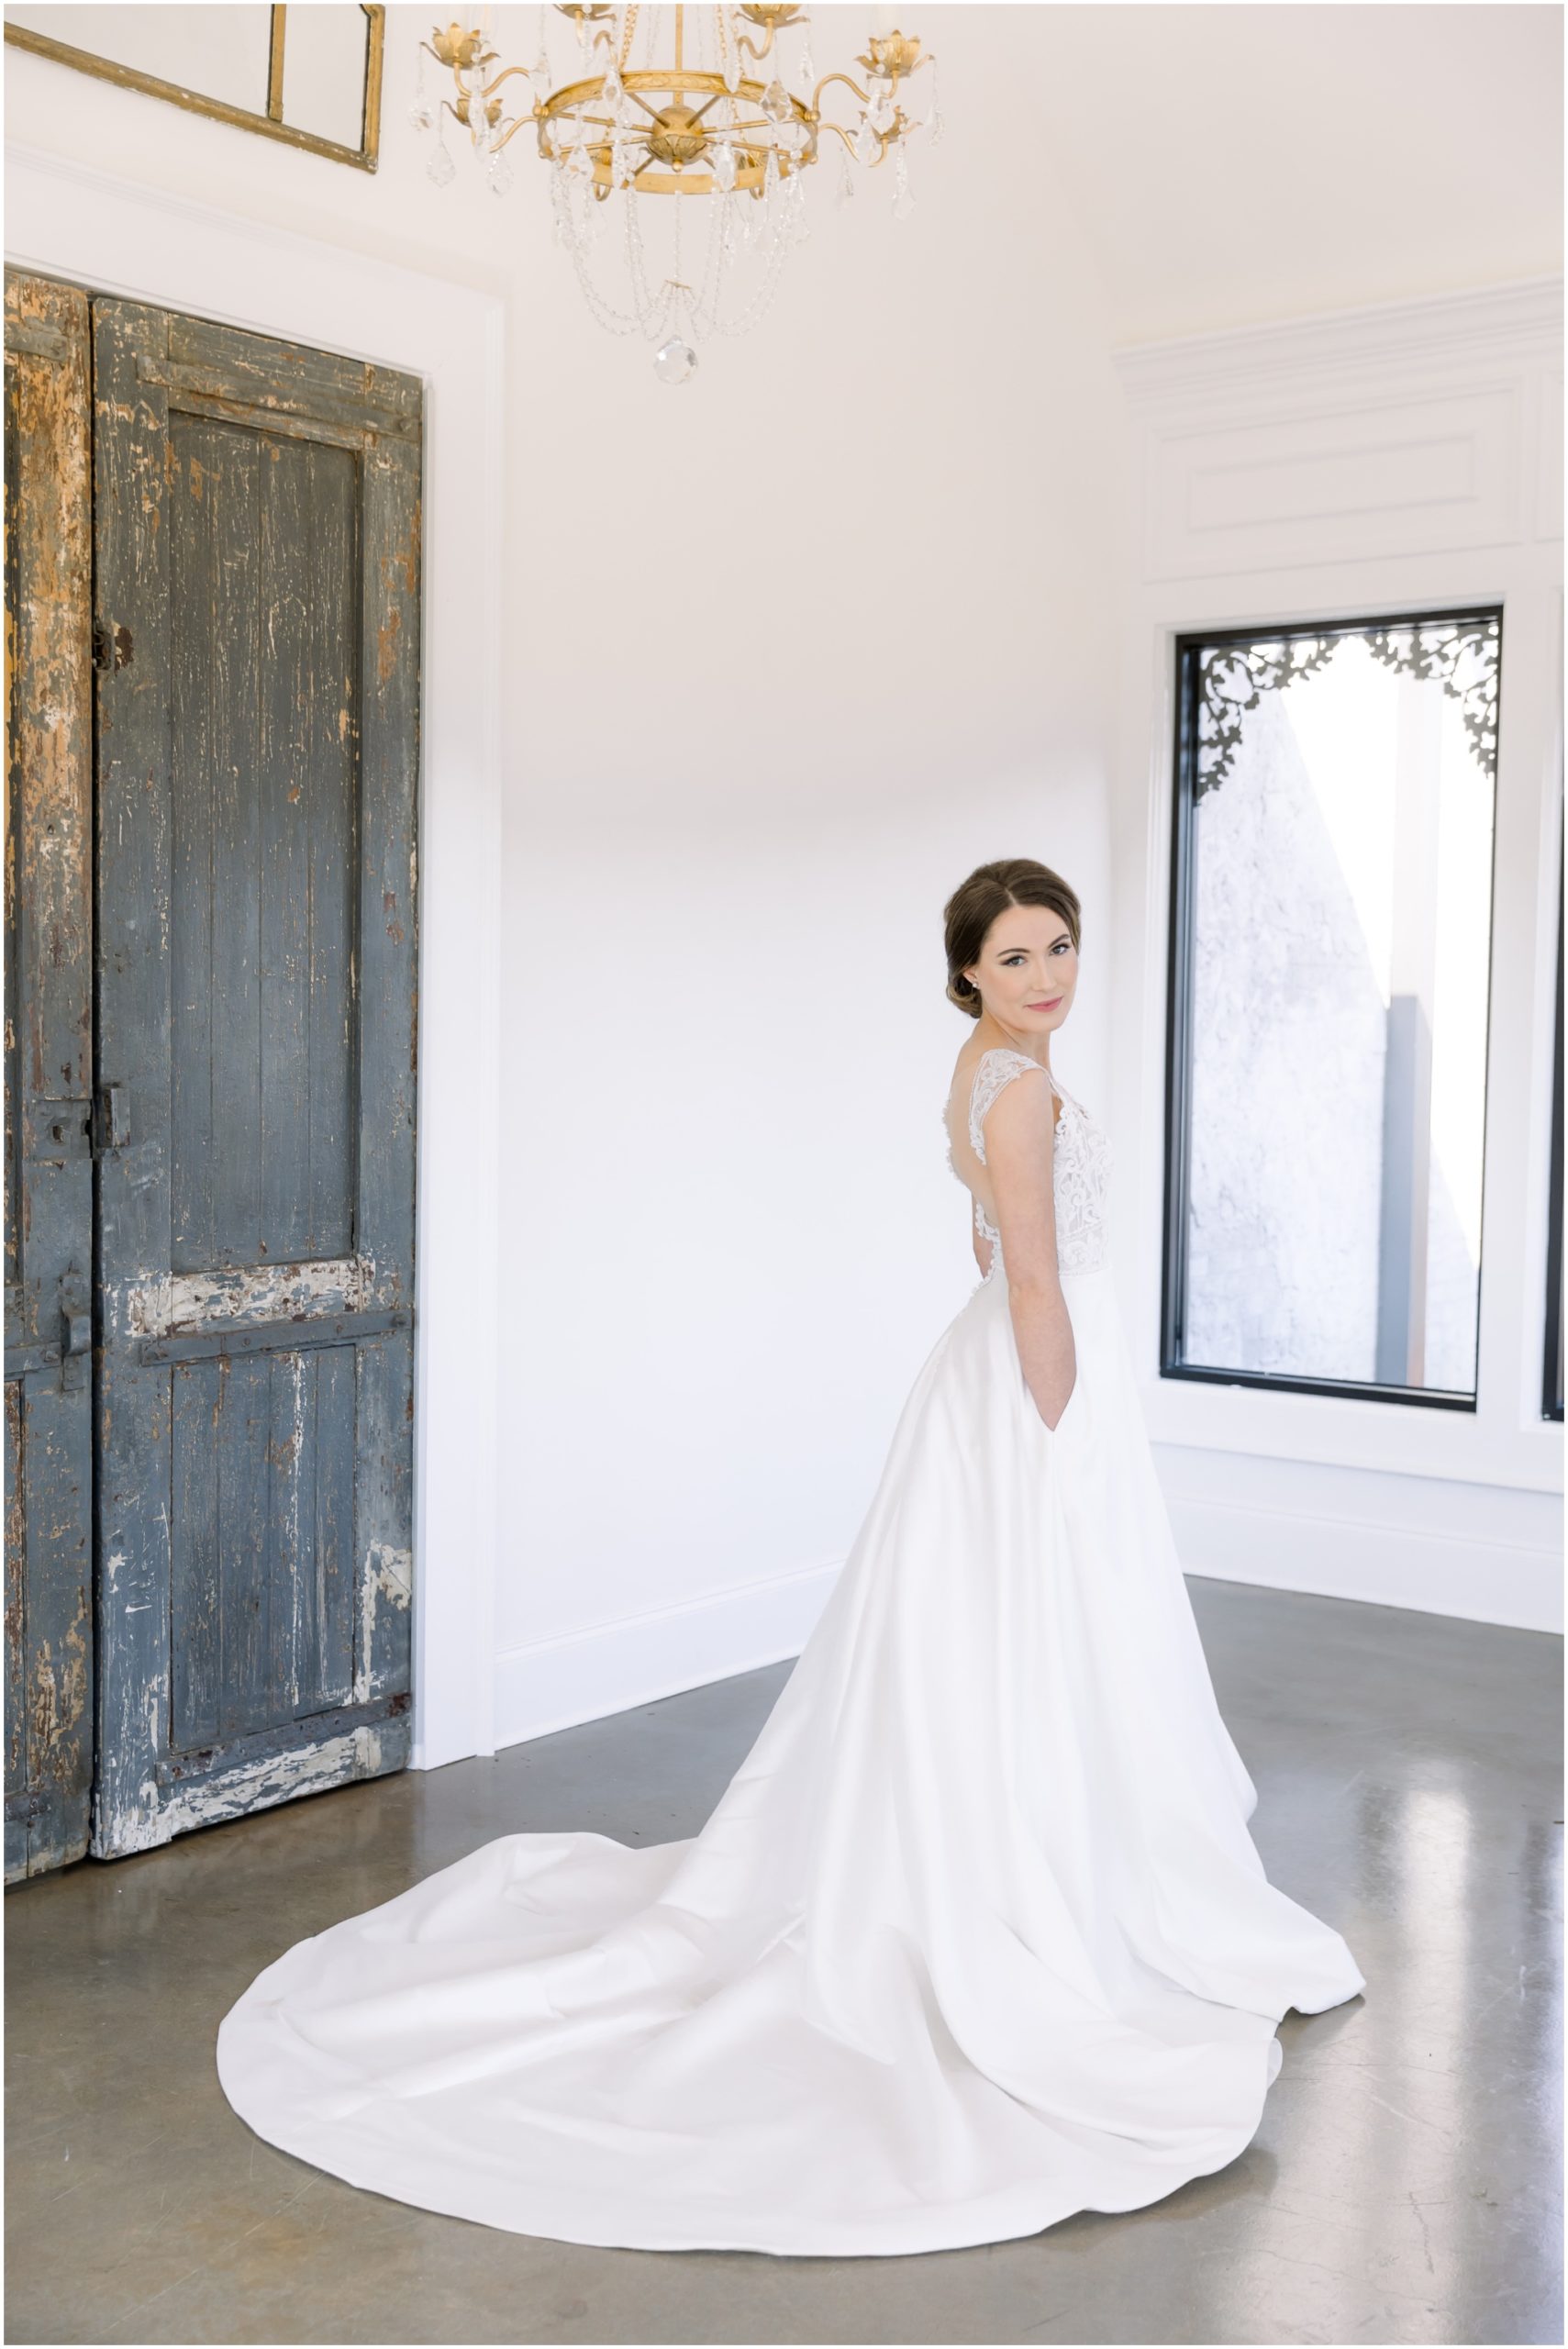 Why You Should Book A Bridal Portrait Session by Alyssa Rachelle Photography